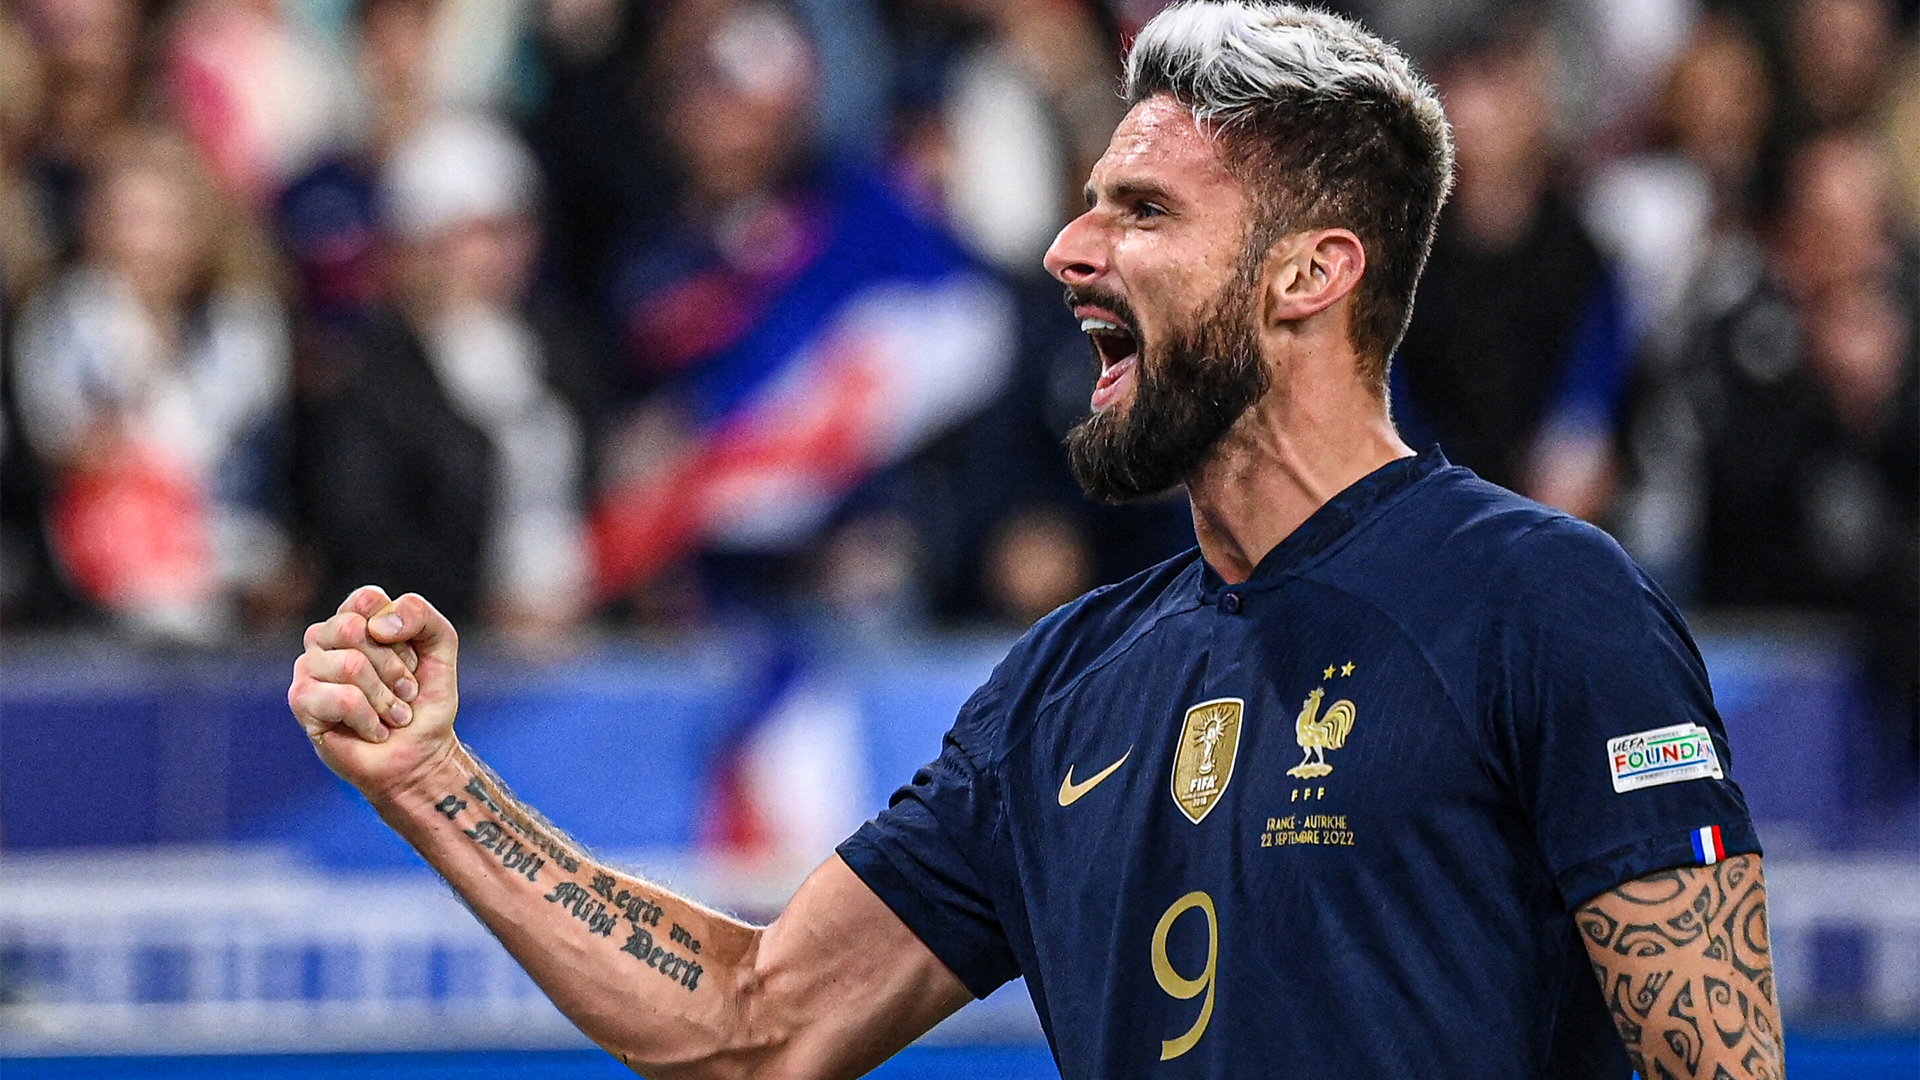 Warrior mentality!' - becomes France's oldest goalscorer as he tries book World Cup place Goal.com